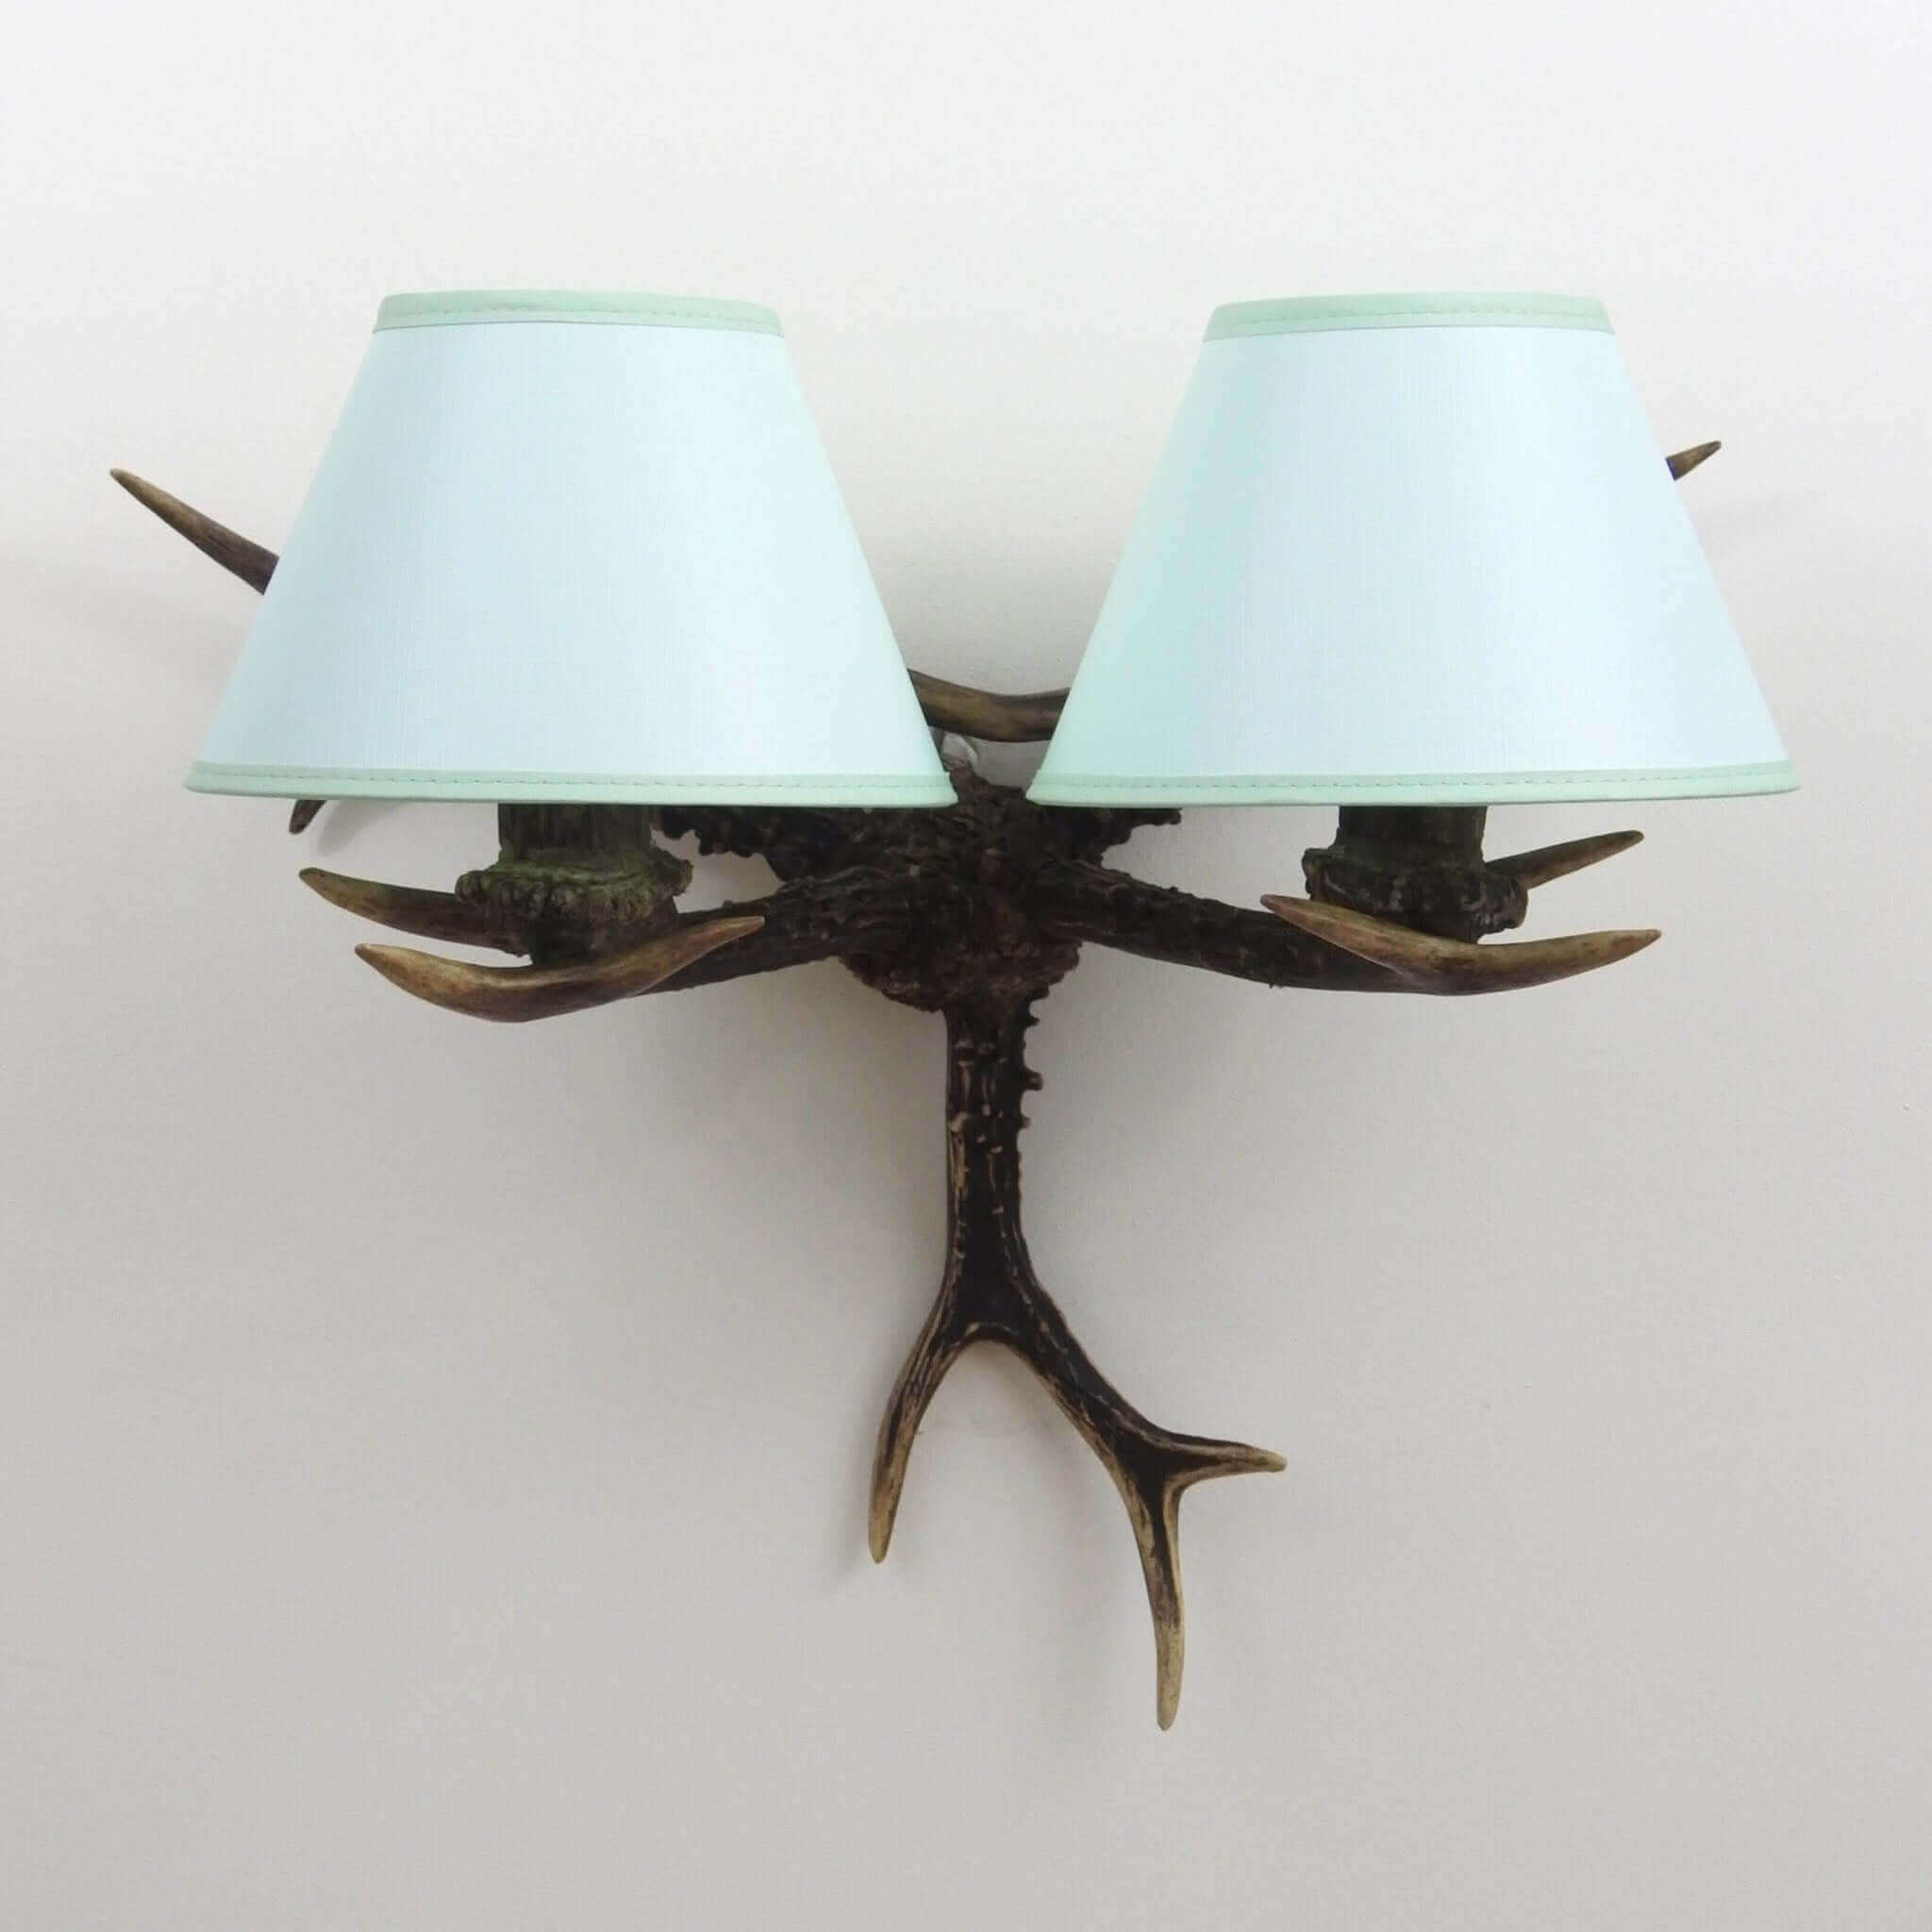 Real antler sconce with shades.